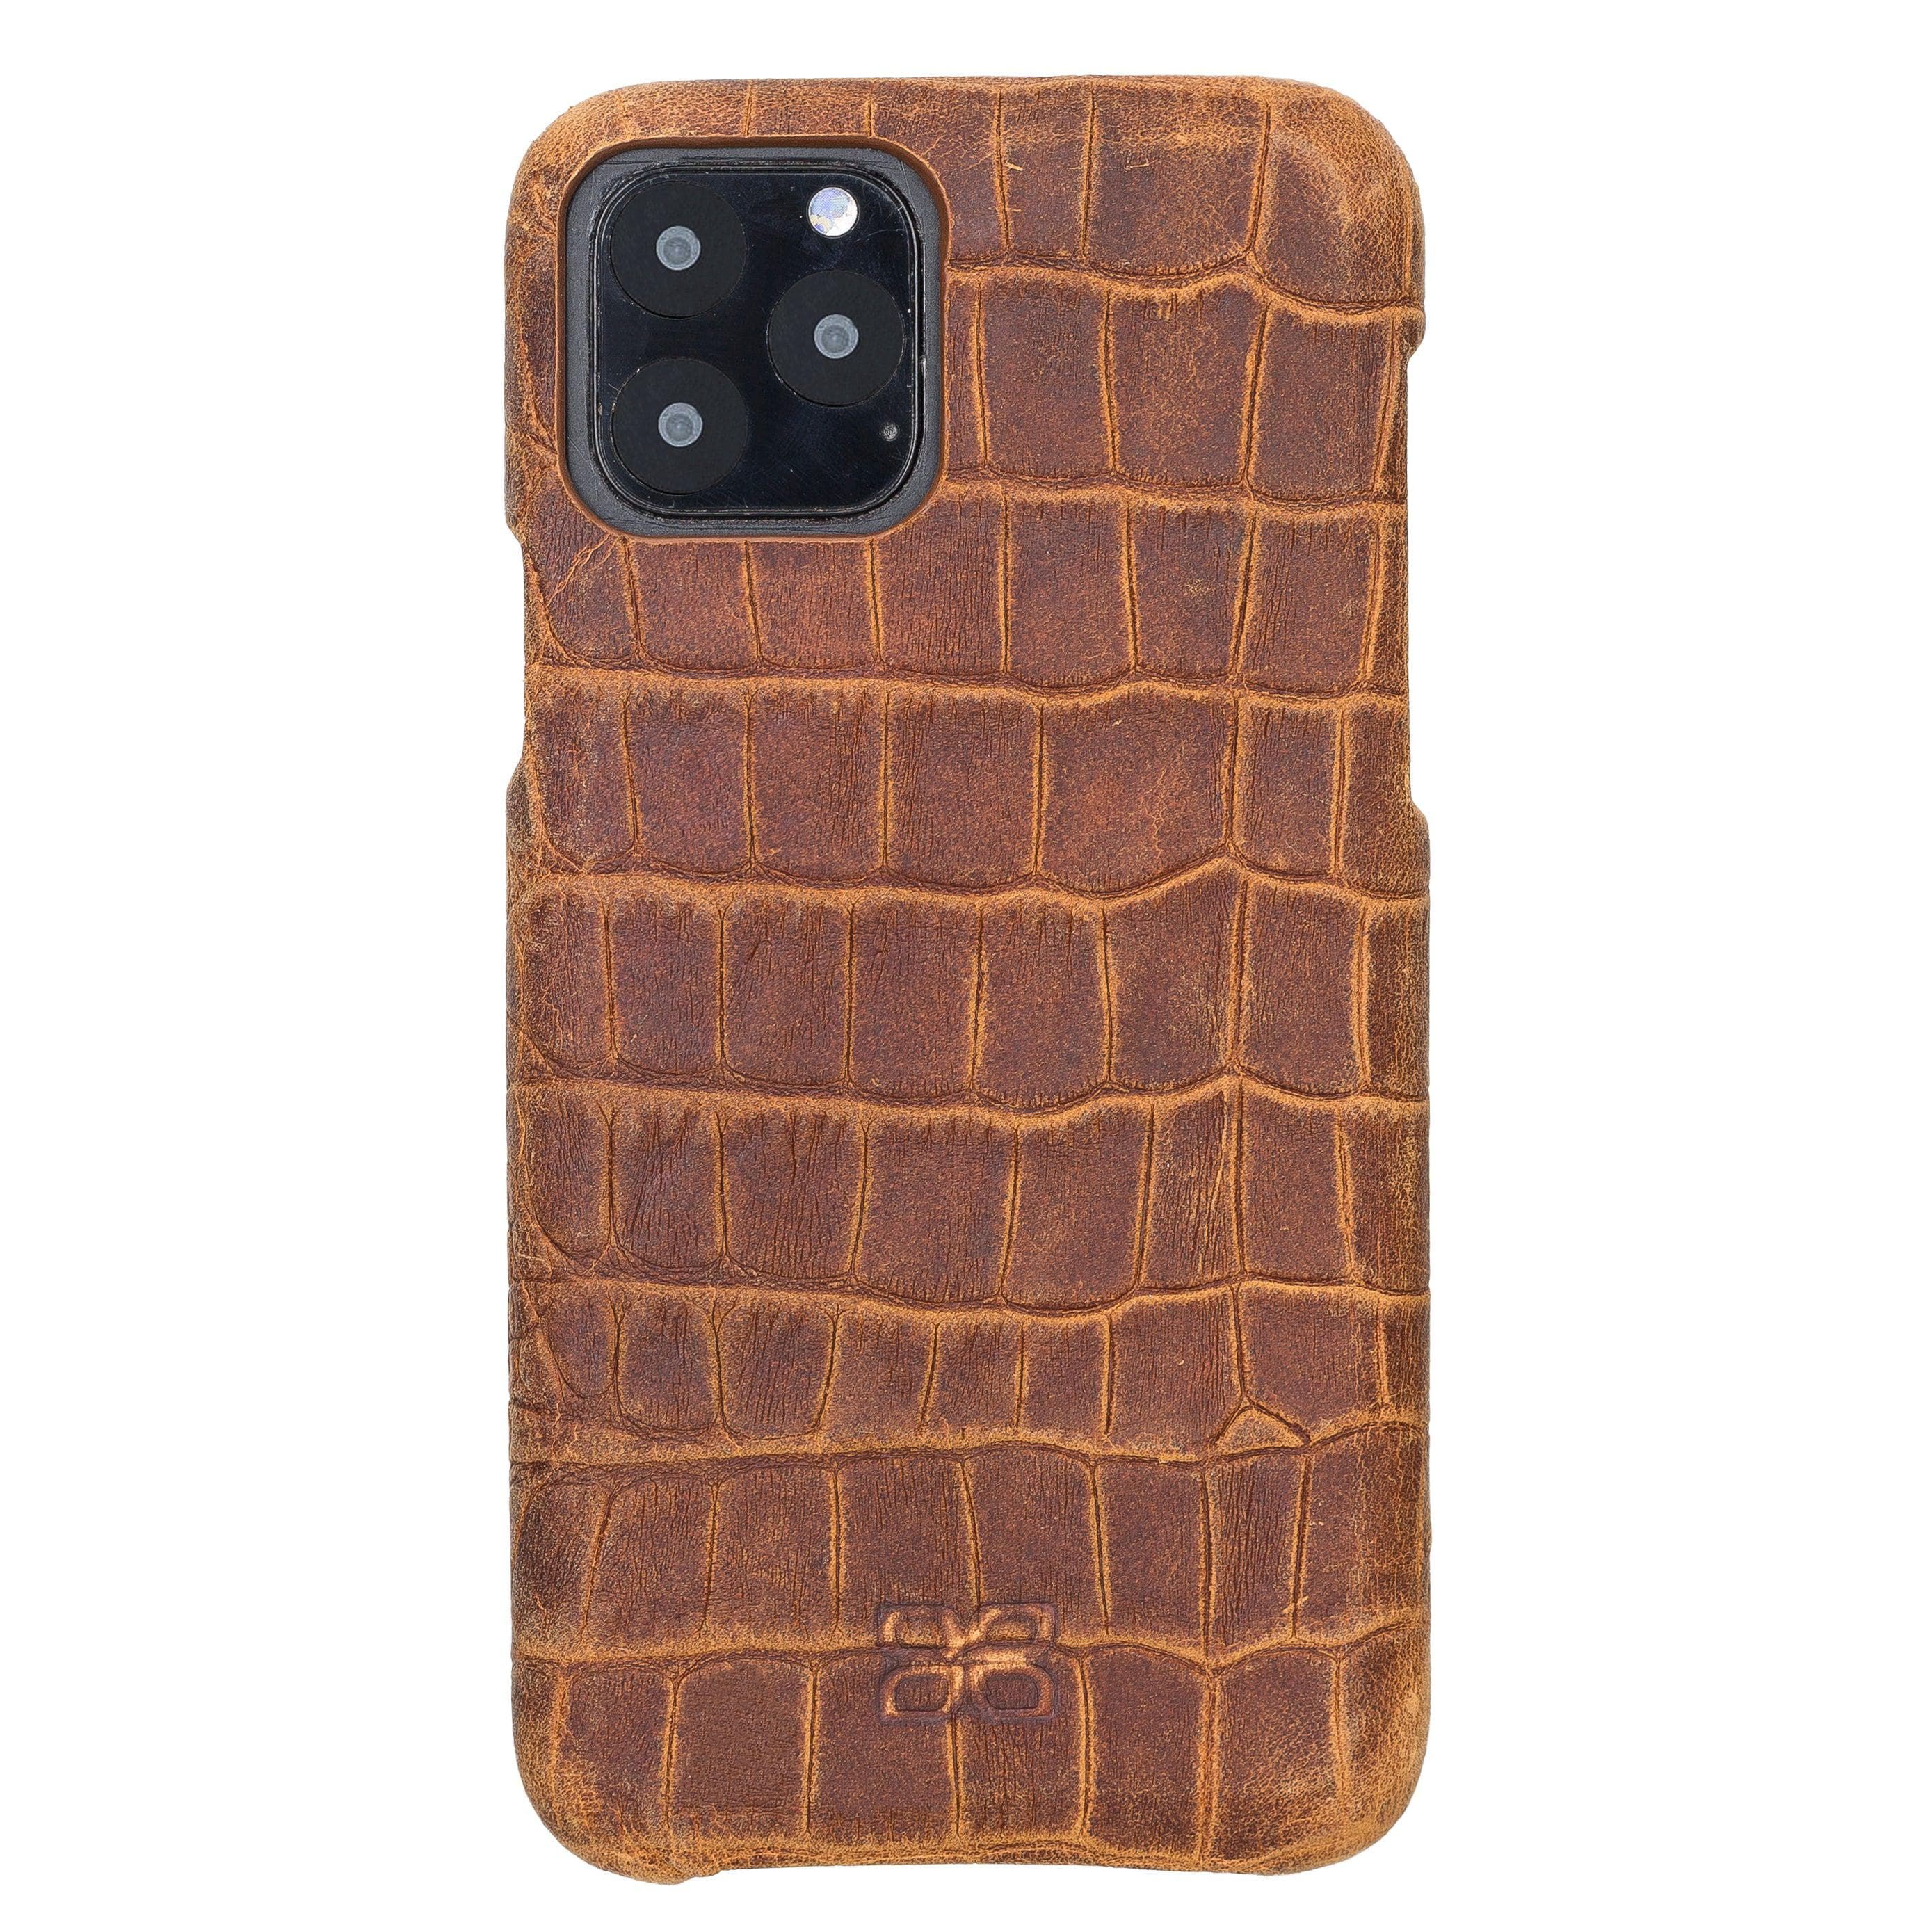 Bouletta Fully Leather Back Cover for Apple iPhone 11 Series iPhone 11 Pro / Dragon Mustard Bouletta LTD